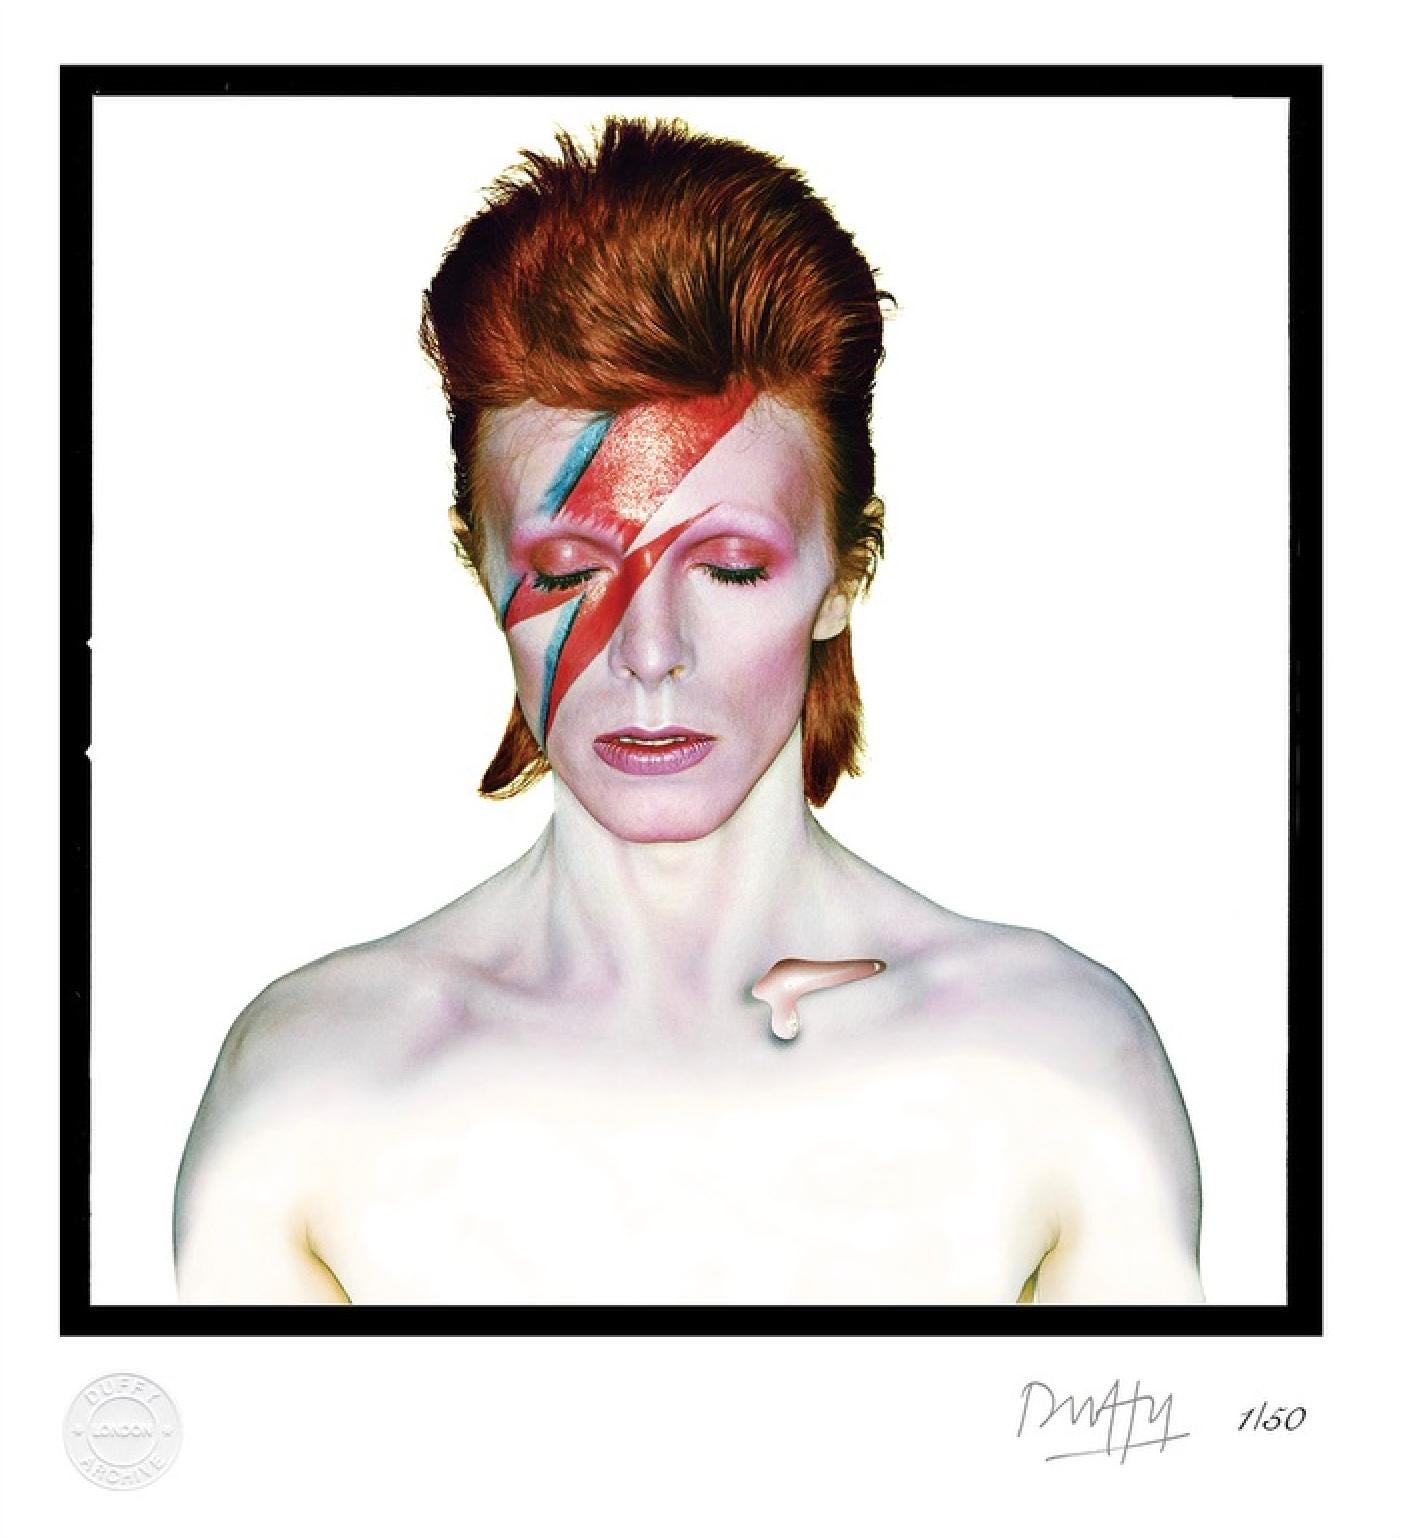 Brian Duffy Color Photograph - David Bowie Aladdin Sane Duffy New Release Ghost Signature Edition Oversize 